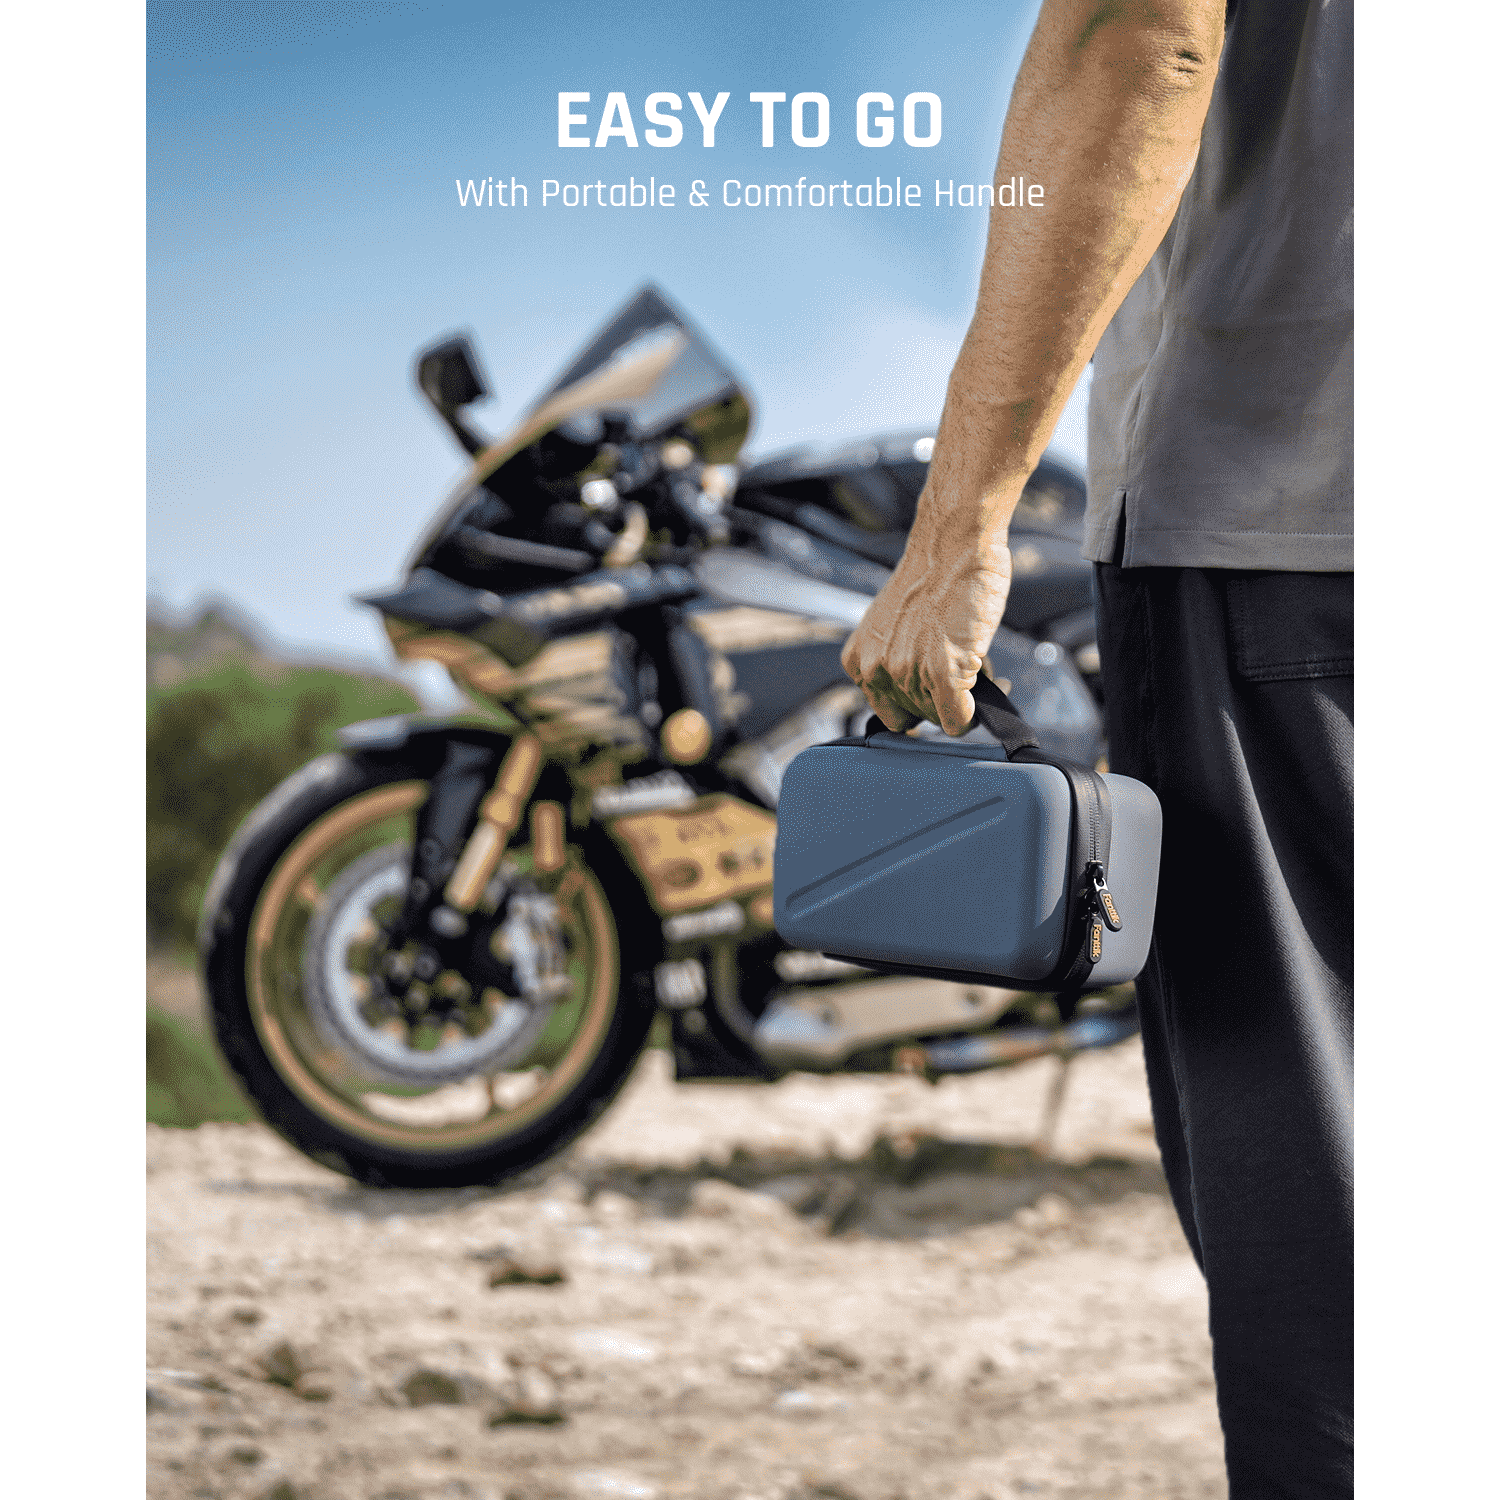 With the non-slip and comfortable handle, this portable and compact carrying case is easy to keep your X8 tire inflator and accessories together and take them everywhere.